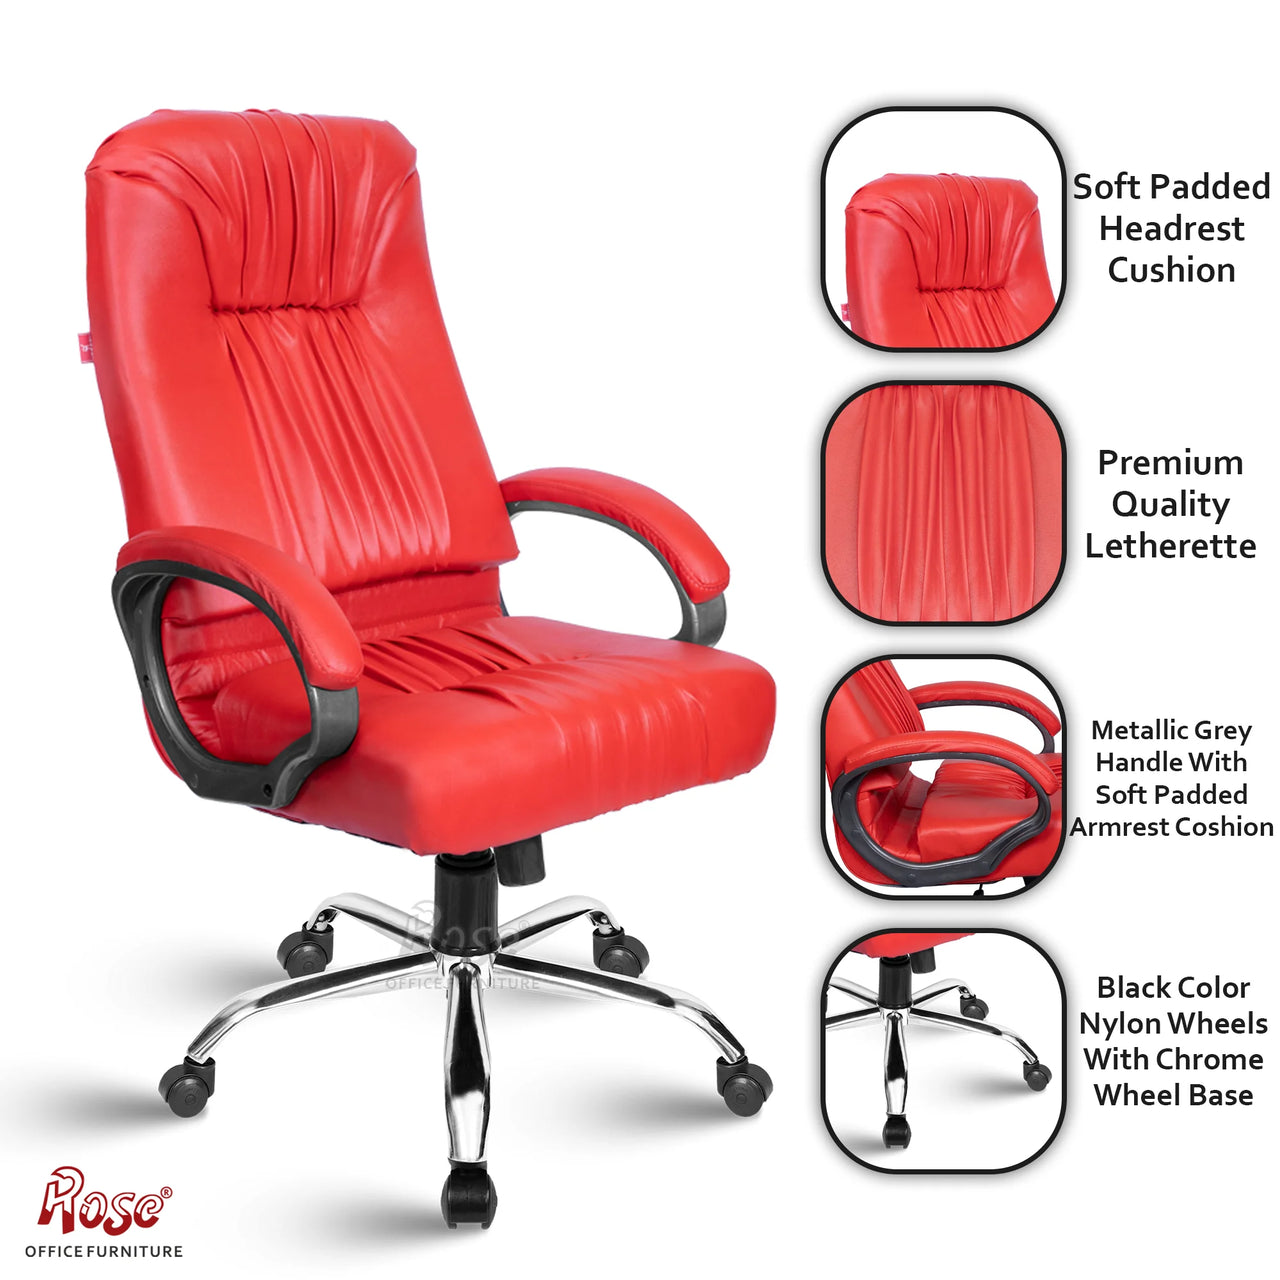 Black Beauty Leatherette Executive High Back Revolving Office Chair (Red)